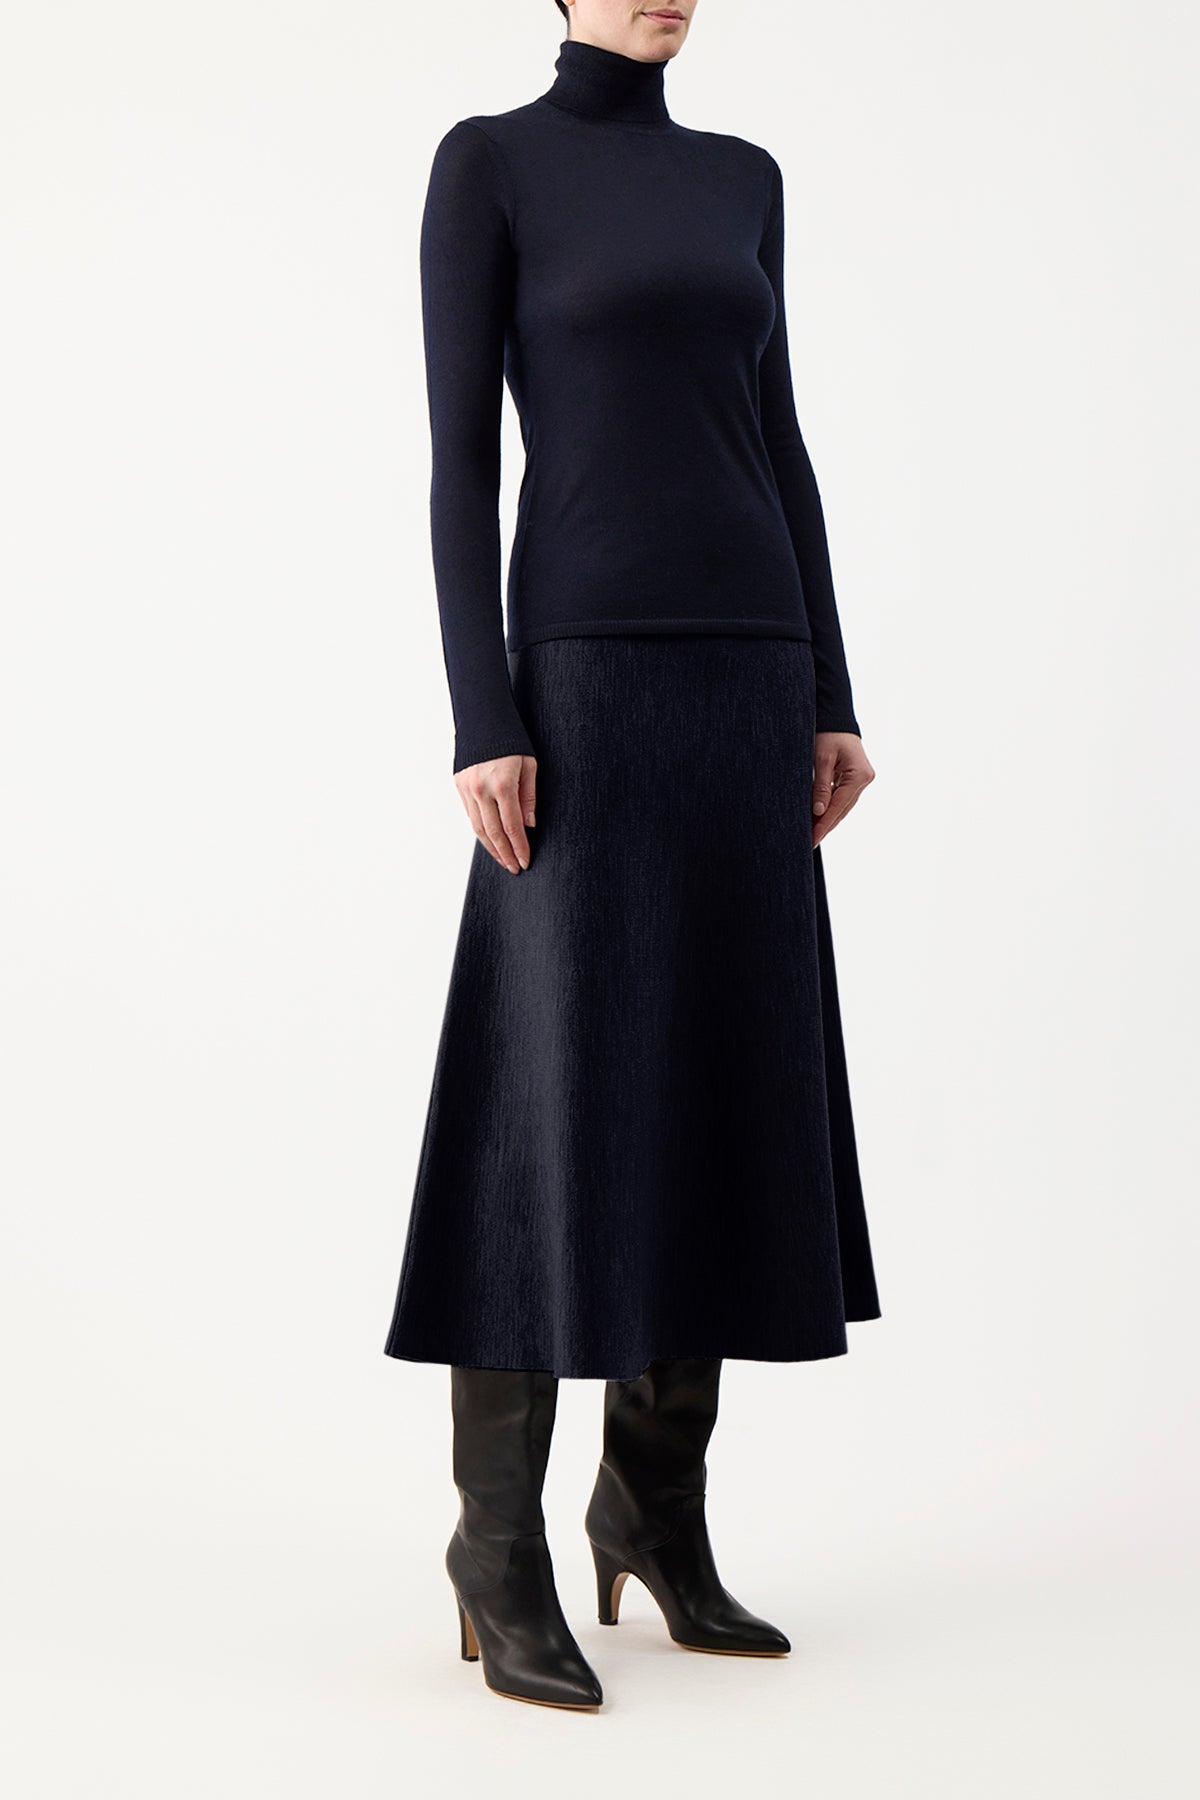 May Turtleneck in Cashmere Wool – Gabriela Hearst